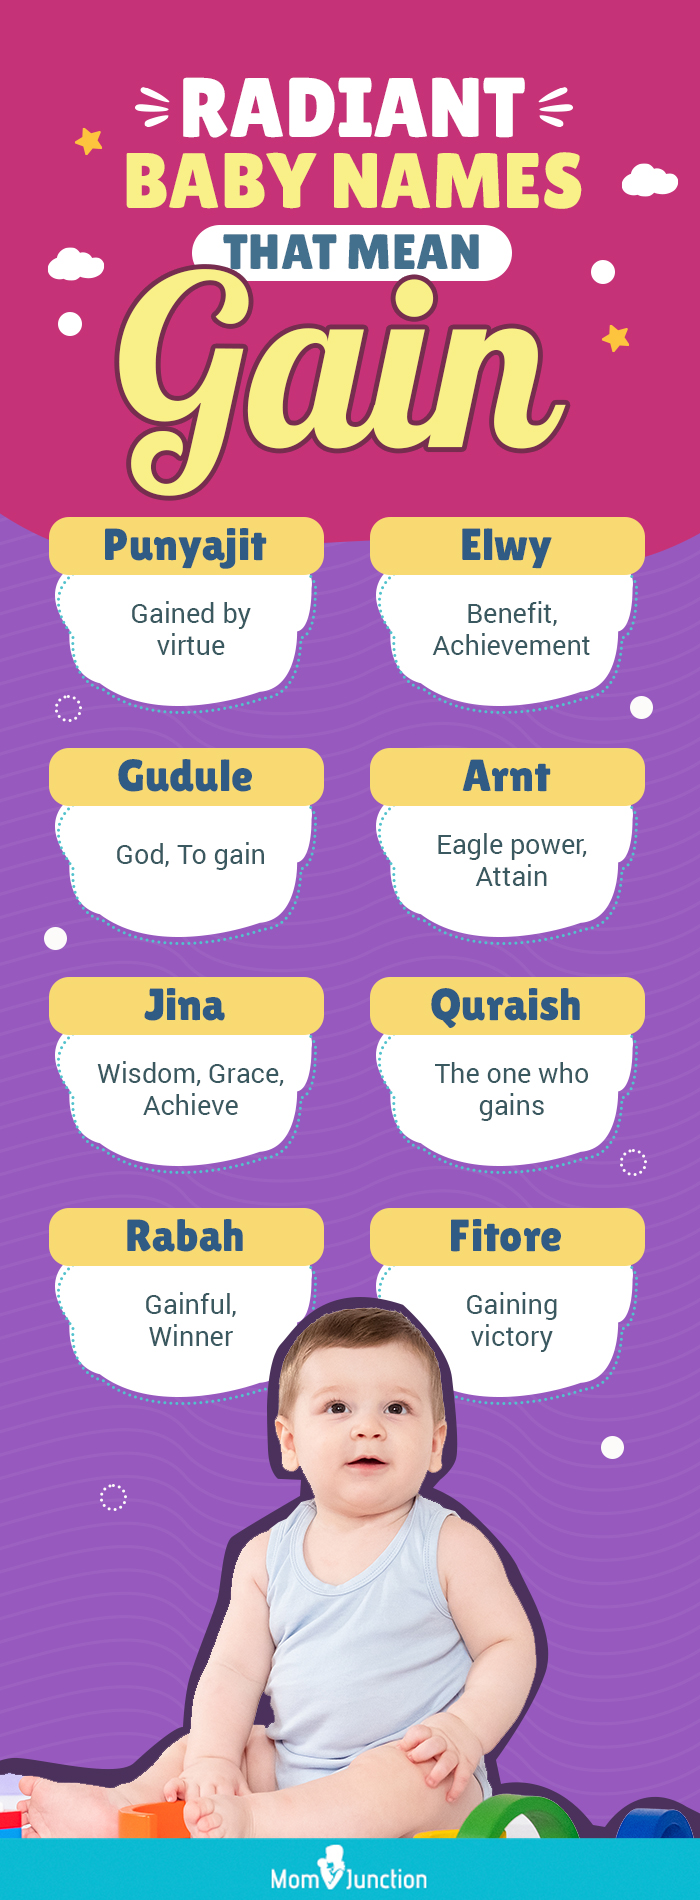 radiant baby names that mean gain (infographic)